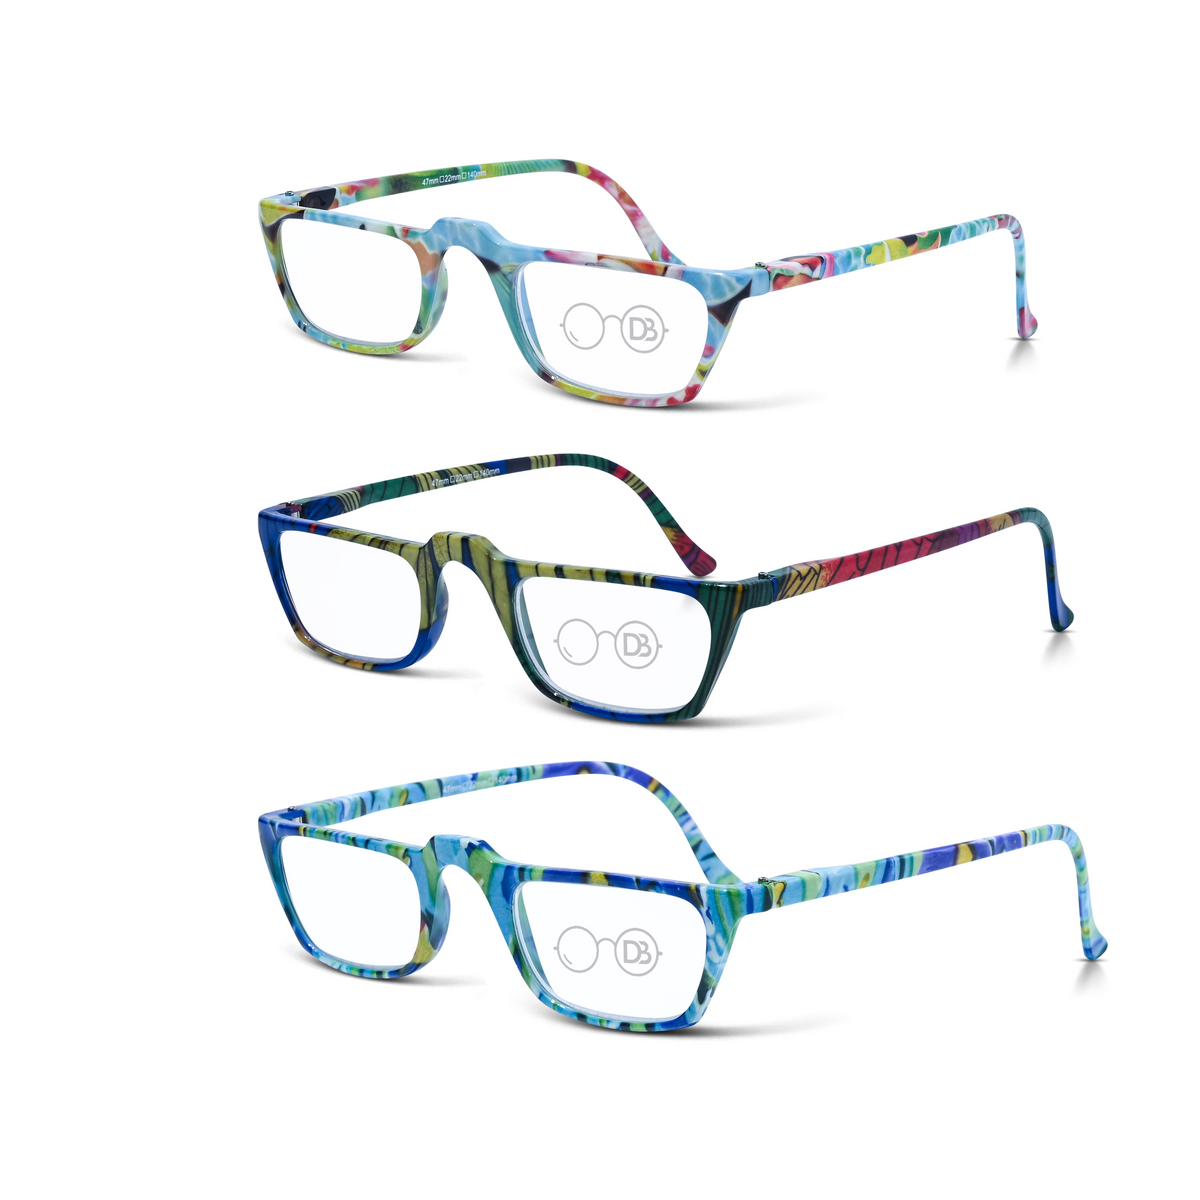 Bright Colorful Half-Eye Readers with Matching Case- South Seas